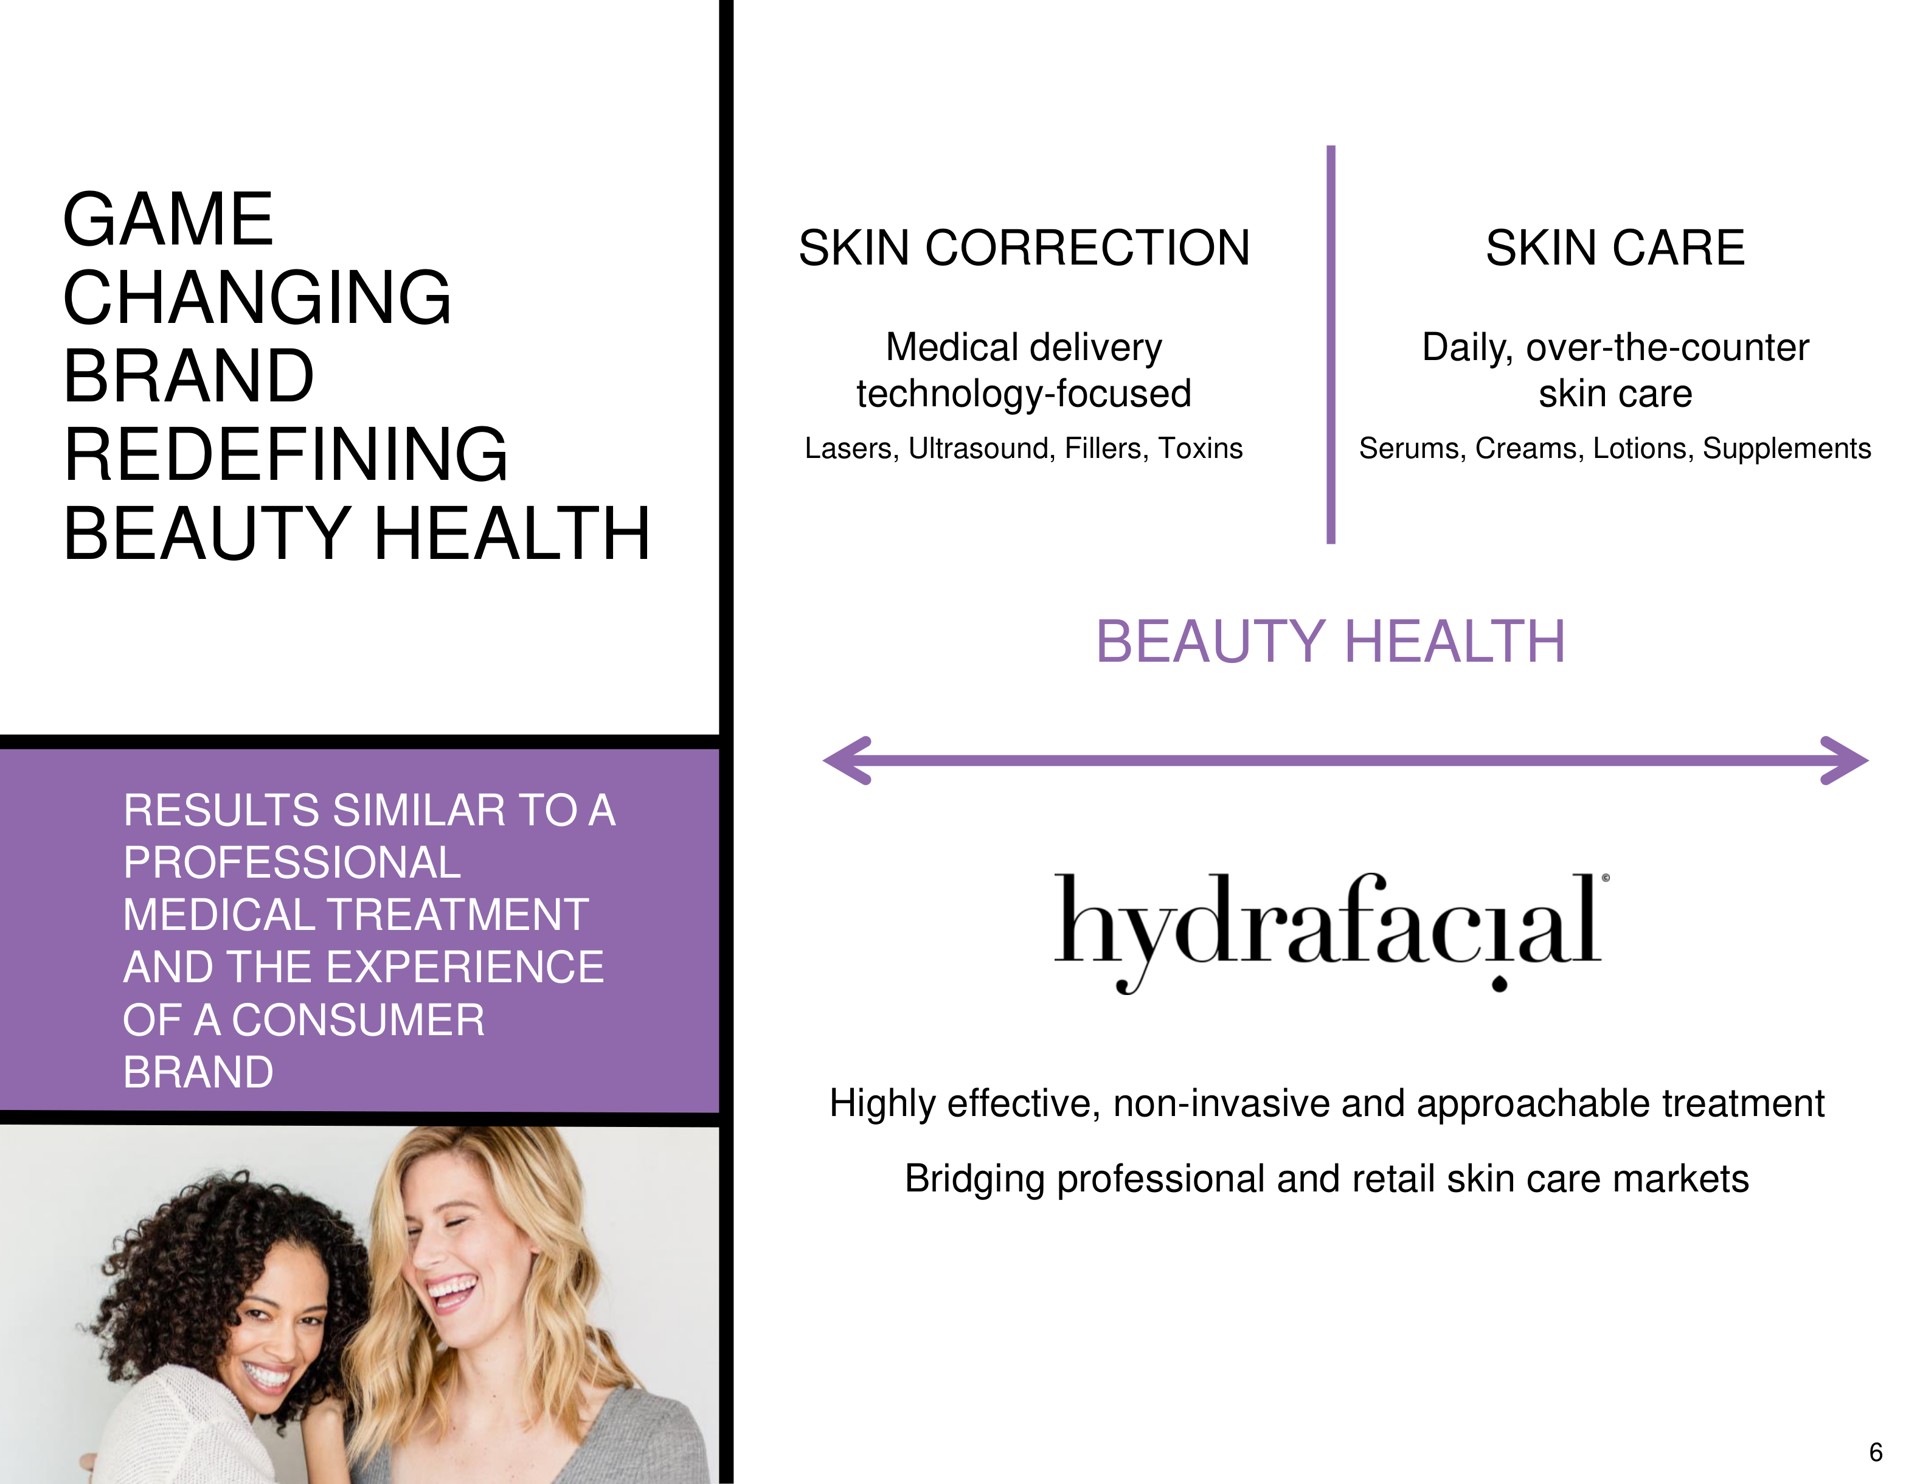 game changing brand redefining beauty health | Hydrafacial